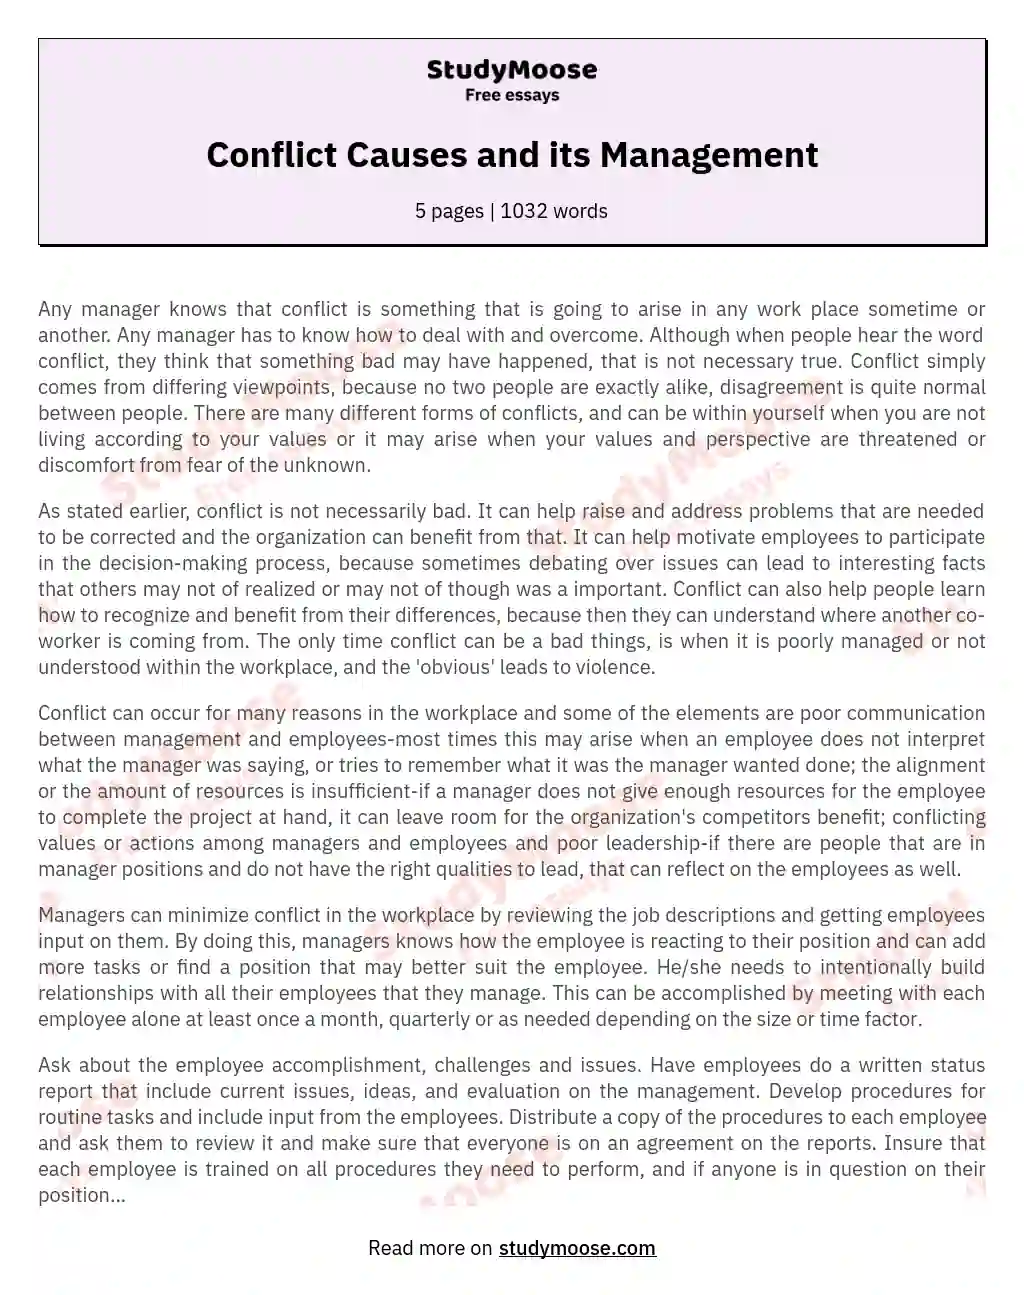 Conflict Causes and its Management essay